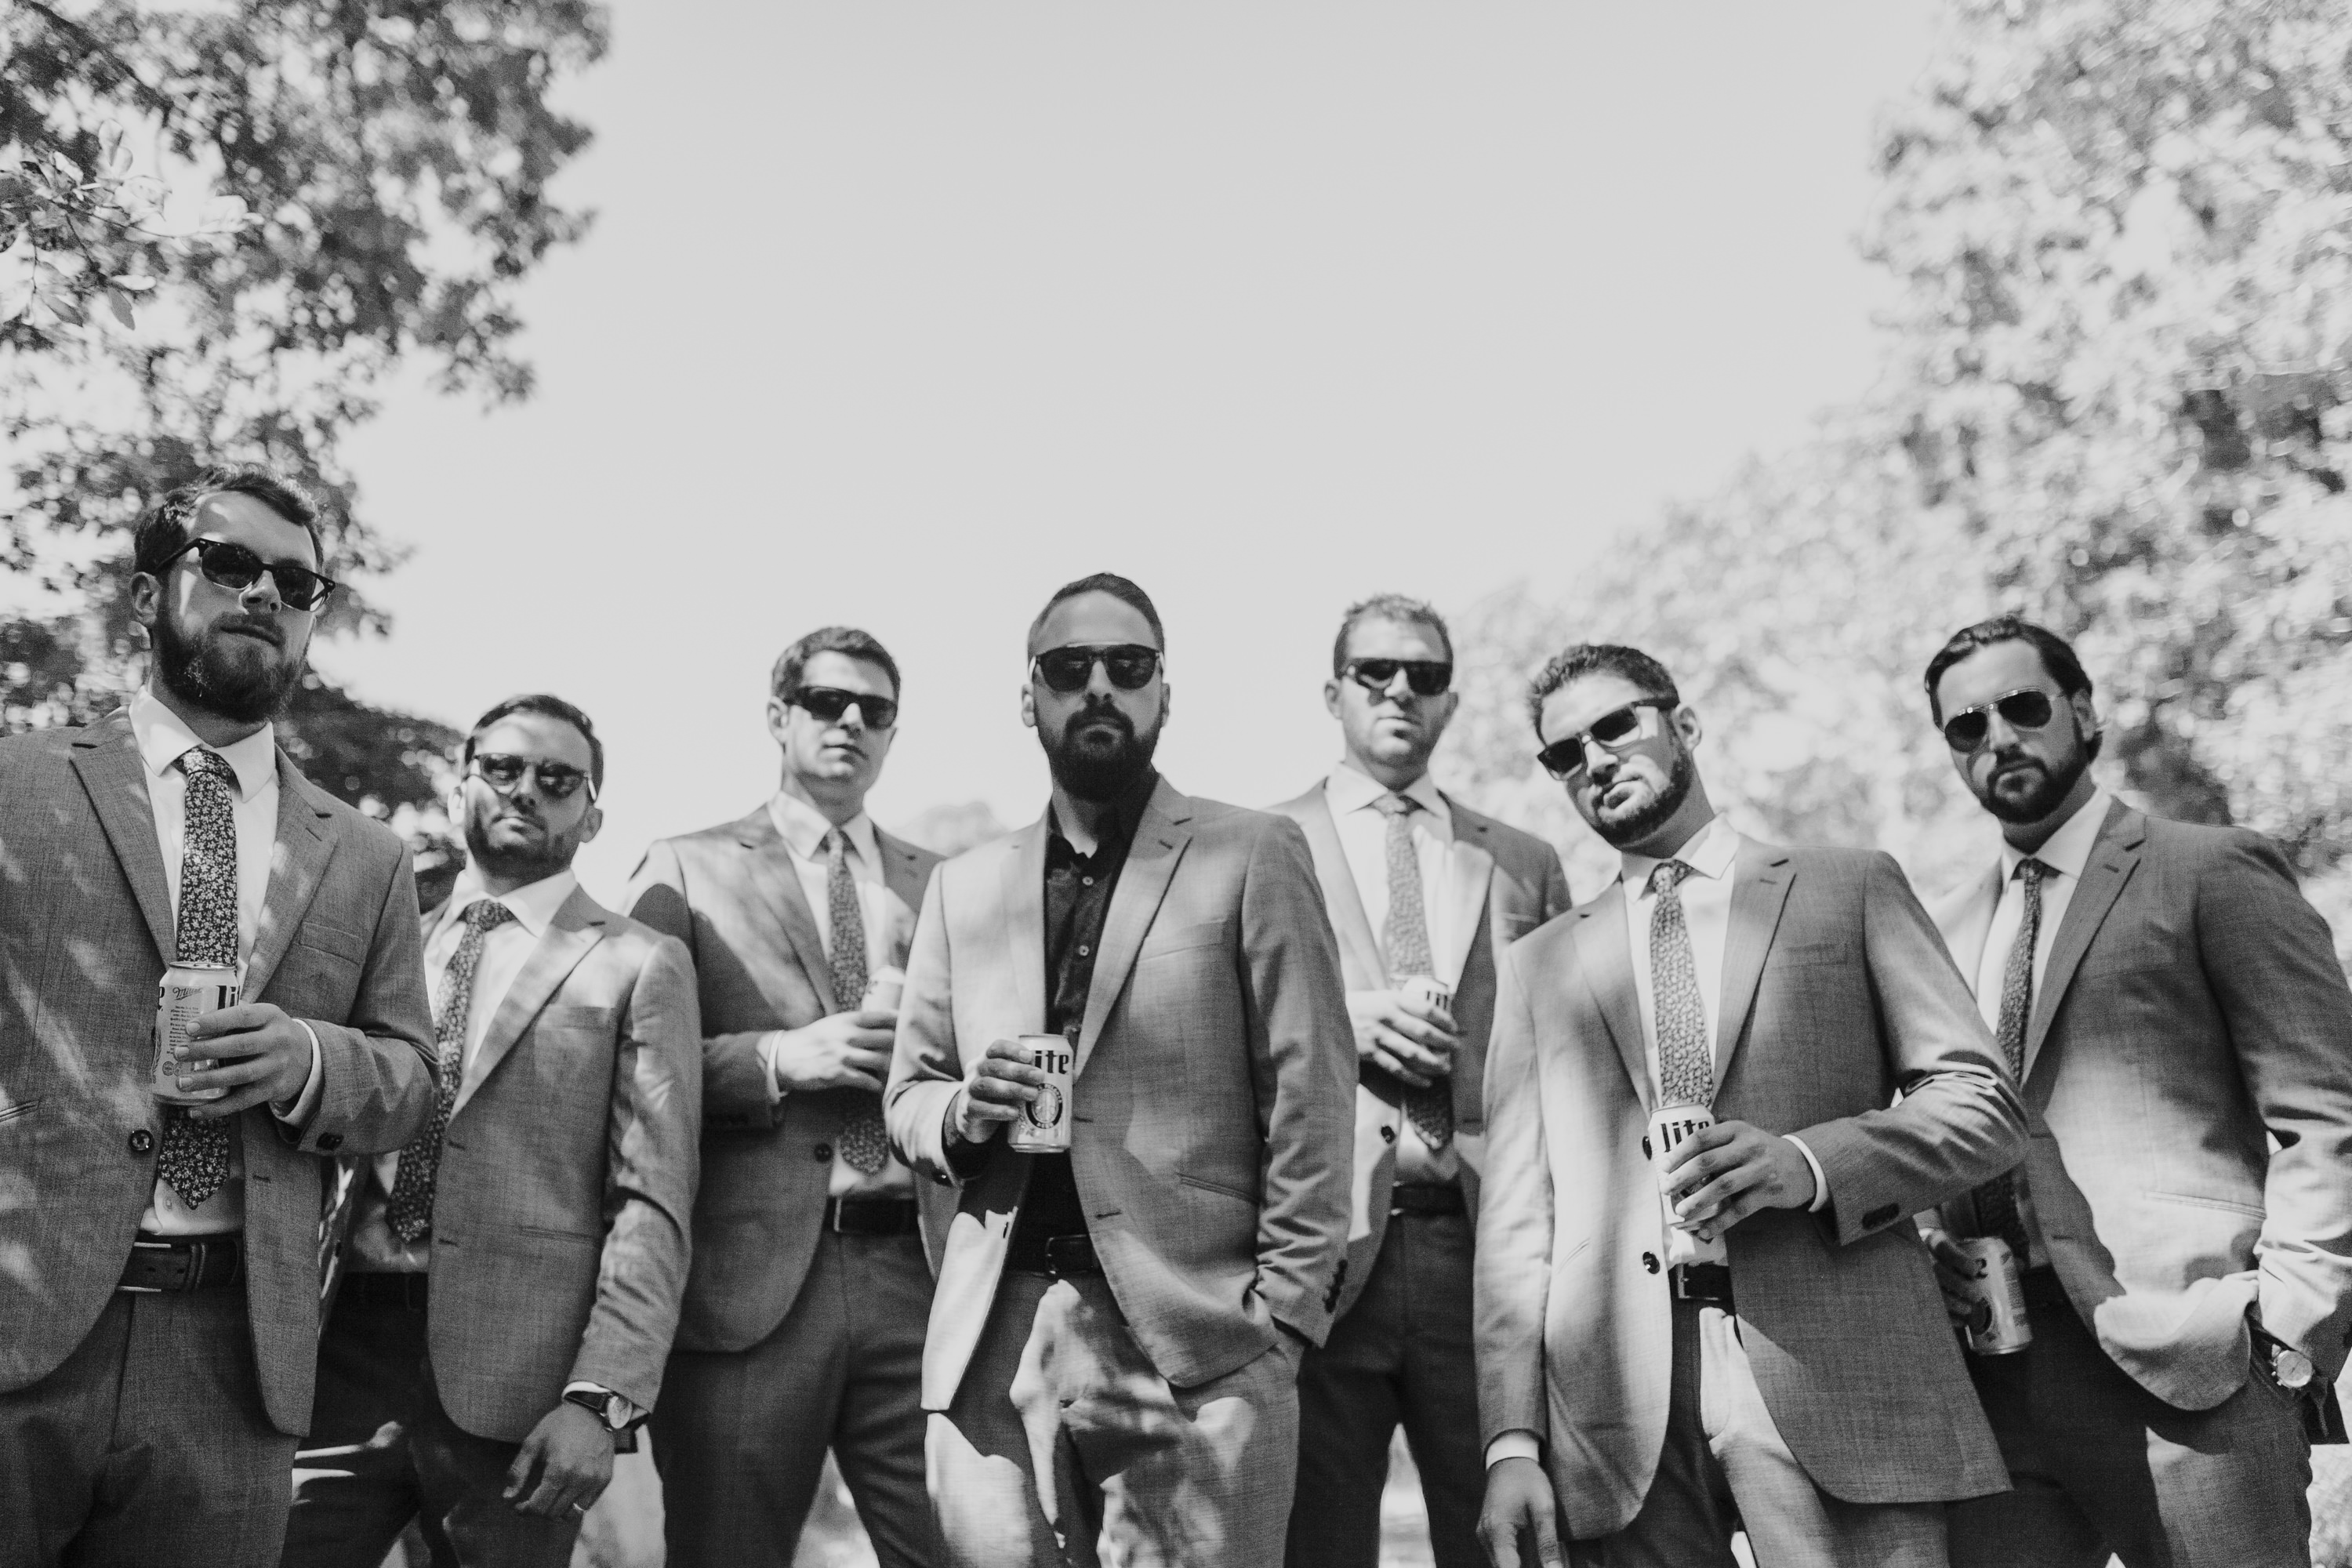 gq, beers bros and sunglasses, black and white picture of groom groomsmen and beer